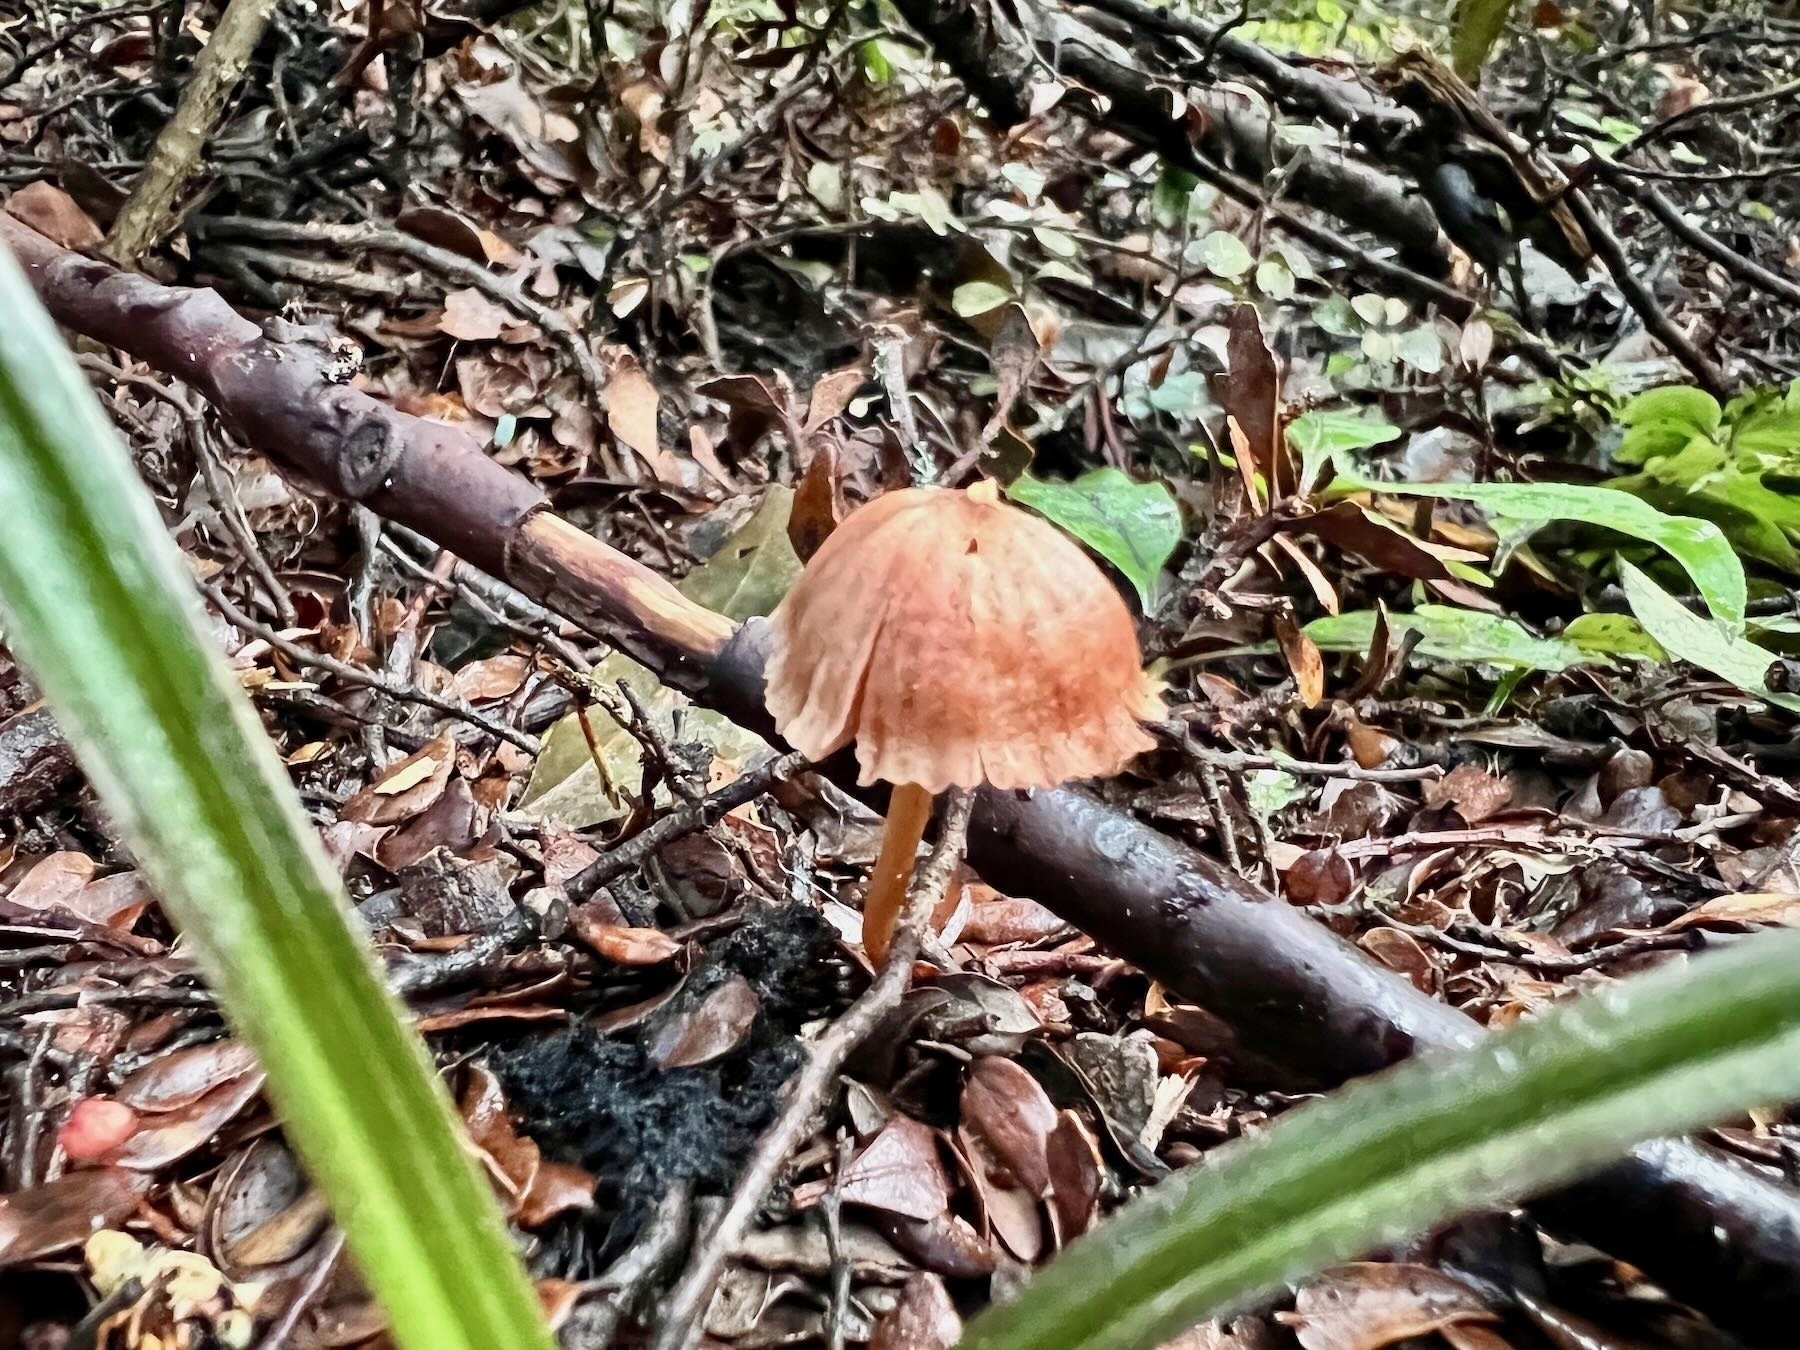 Light brown fungus on a stalk in leaf litter. 